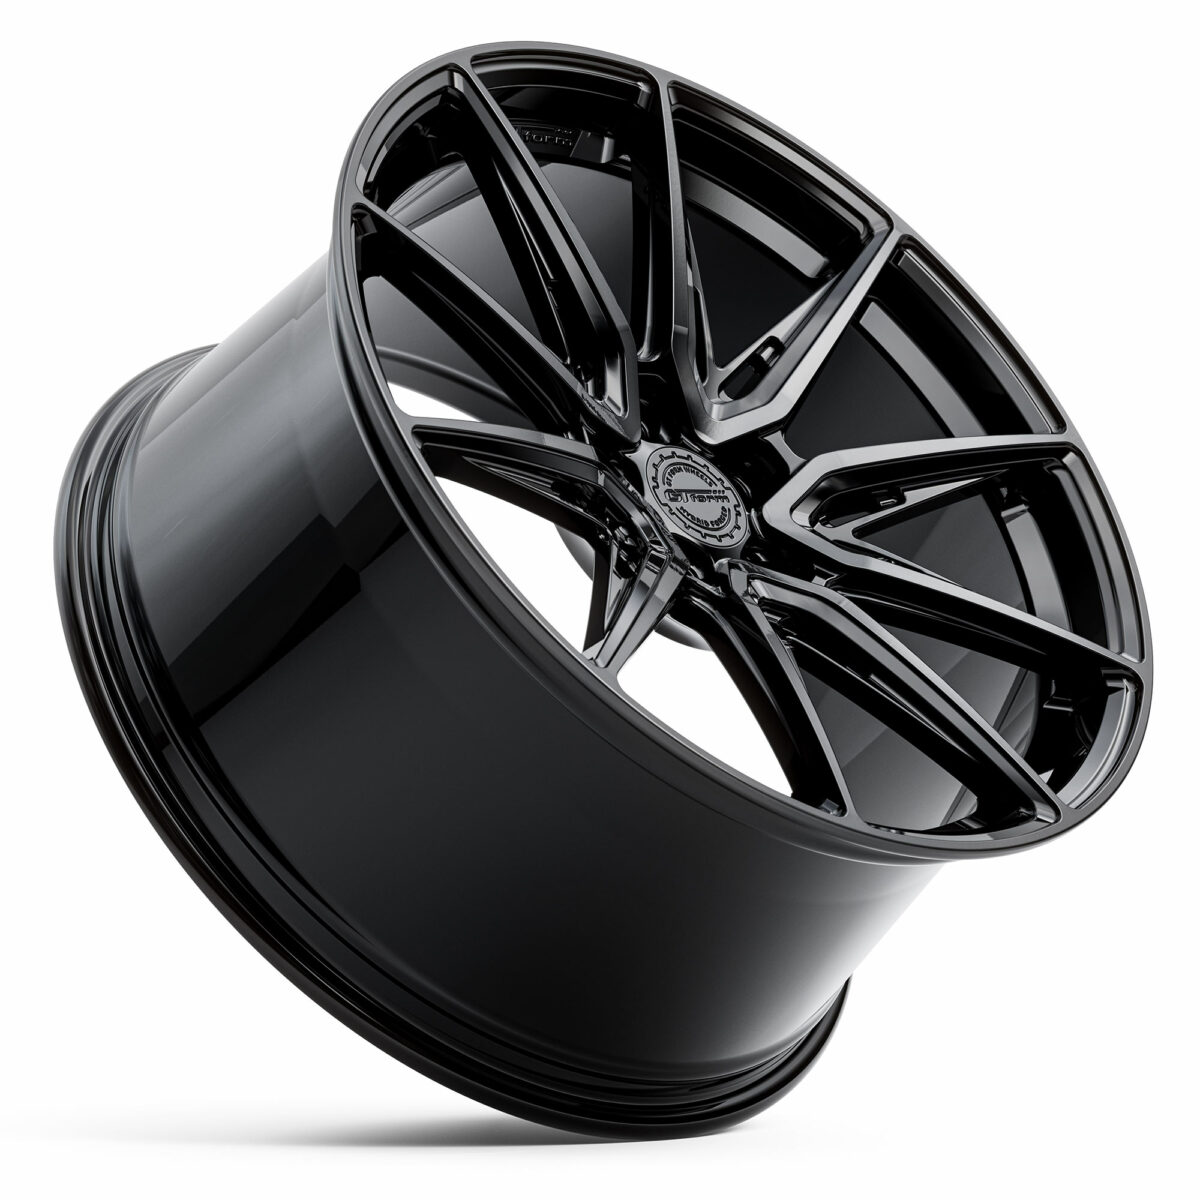 PERFORMANCE WHEELS GT FORM HF4.1 HYBRID FORGED DOUBLE TINTED BLACK 20X9 20X10.5 20X12 STAGGERED RIMS